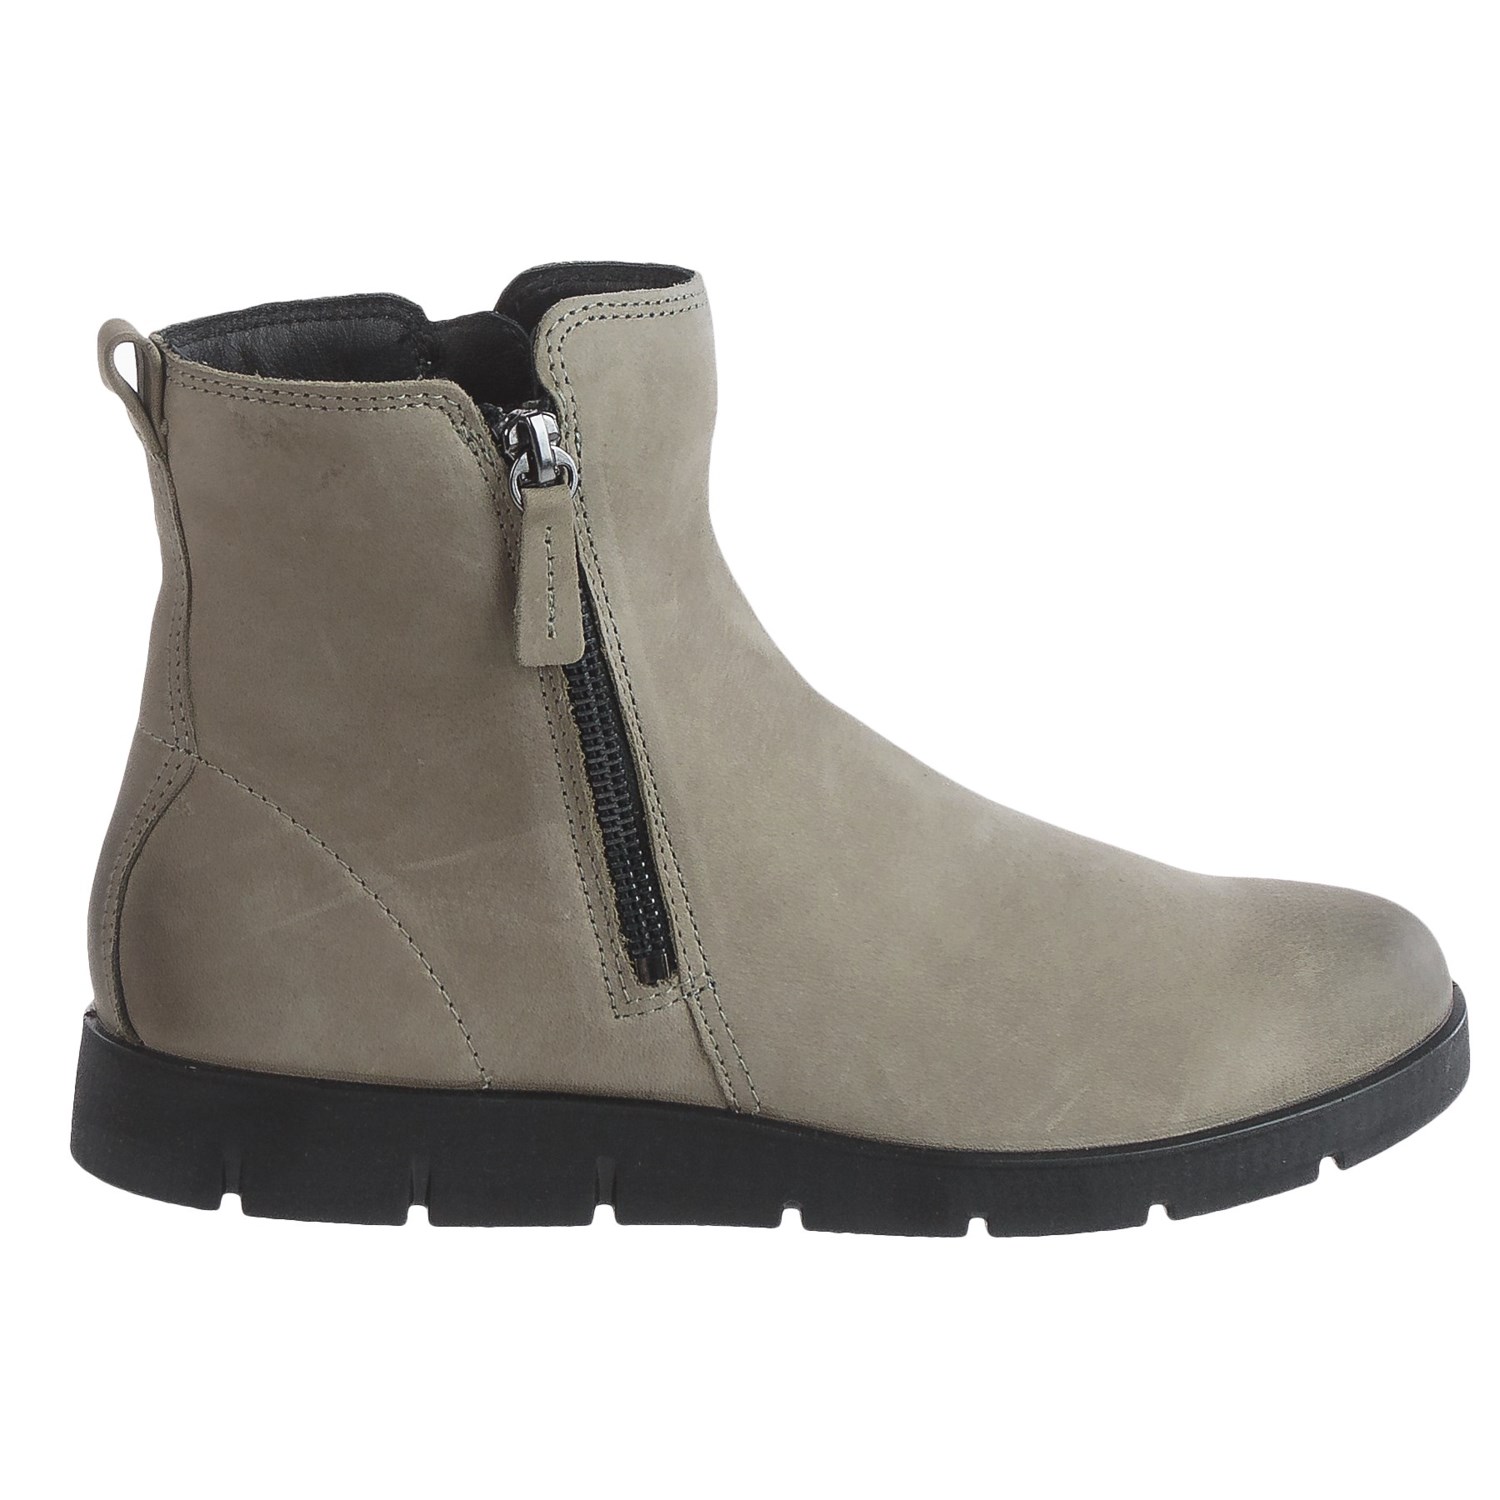 ECCO Bella Zip Ankle Boots (For Women) - Save 67%